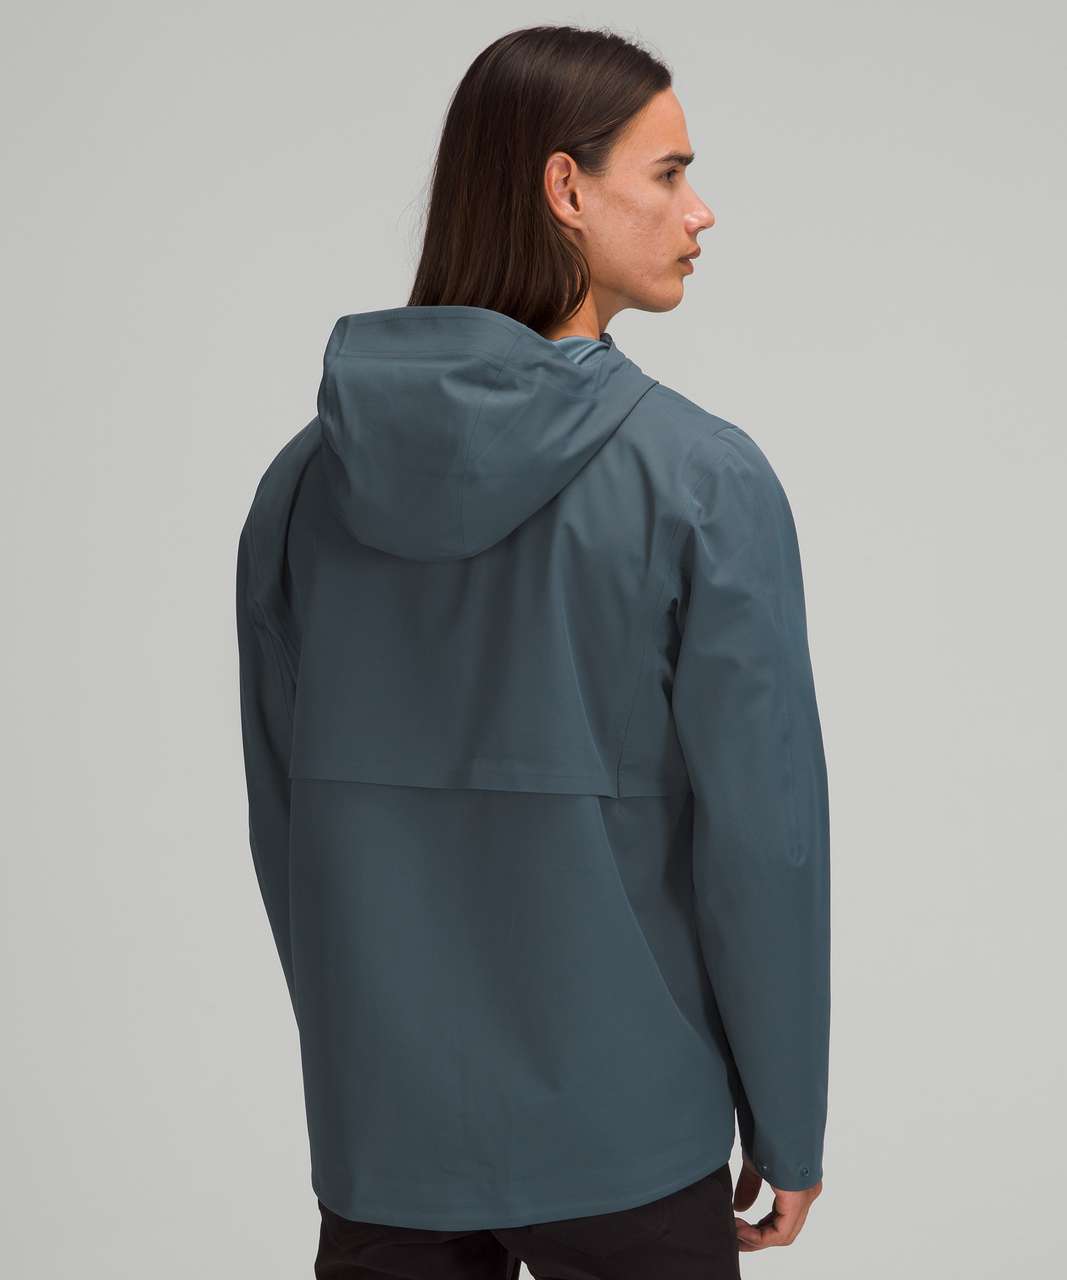 Lululemon Outpour StretchSeal Jacket - Iron Blue